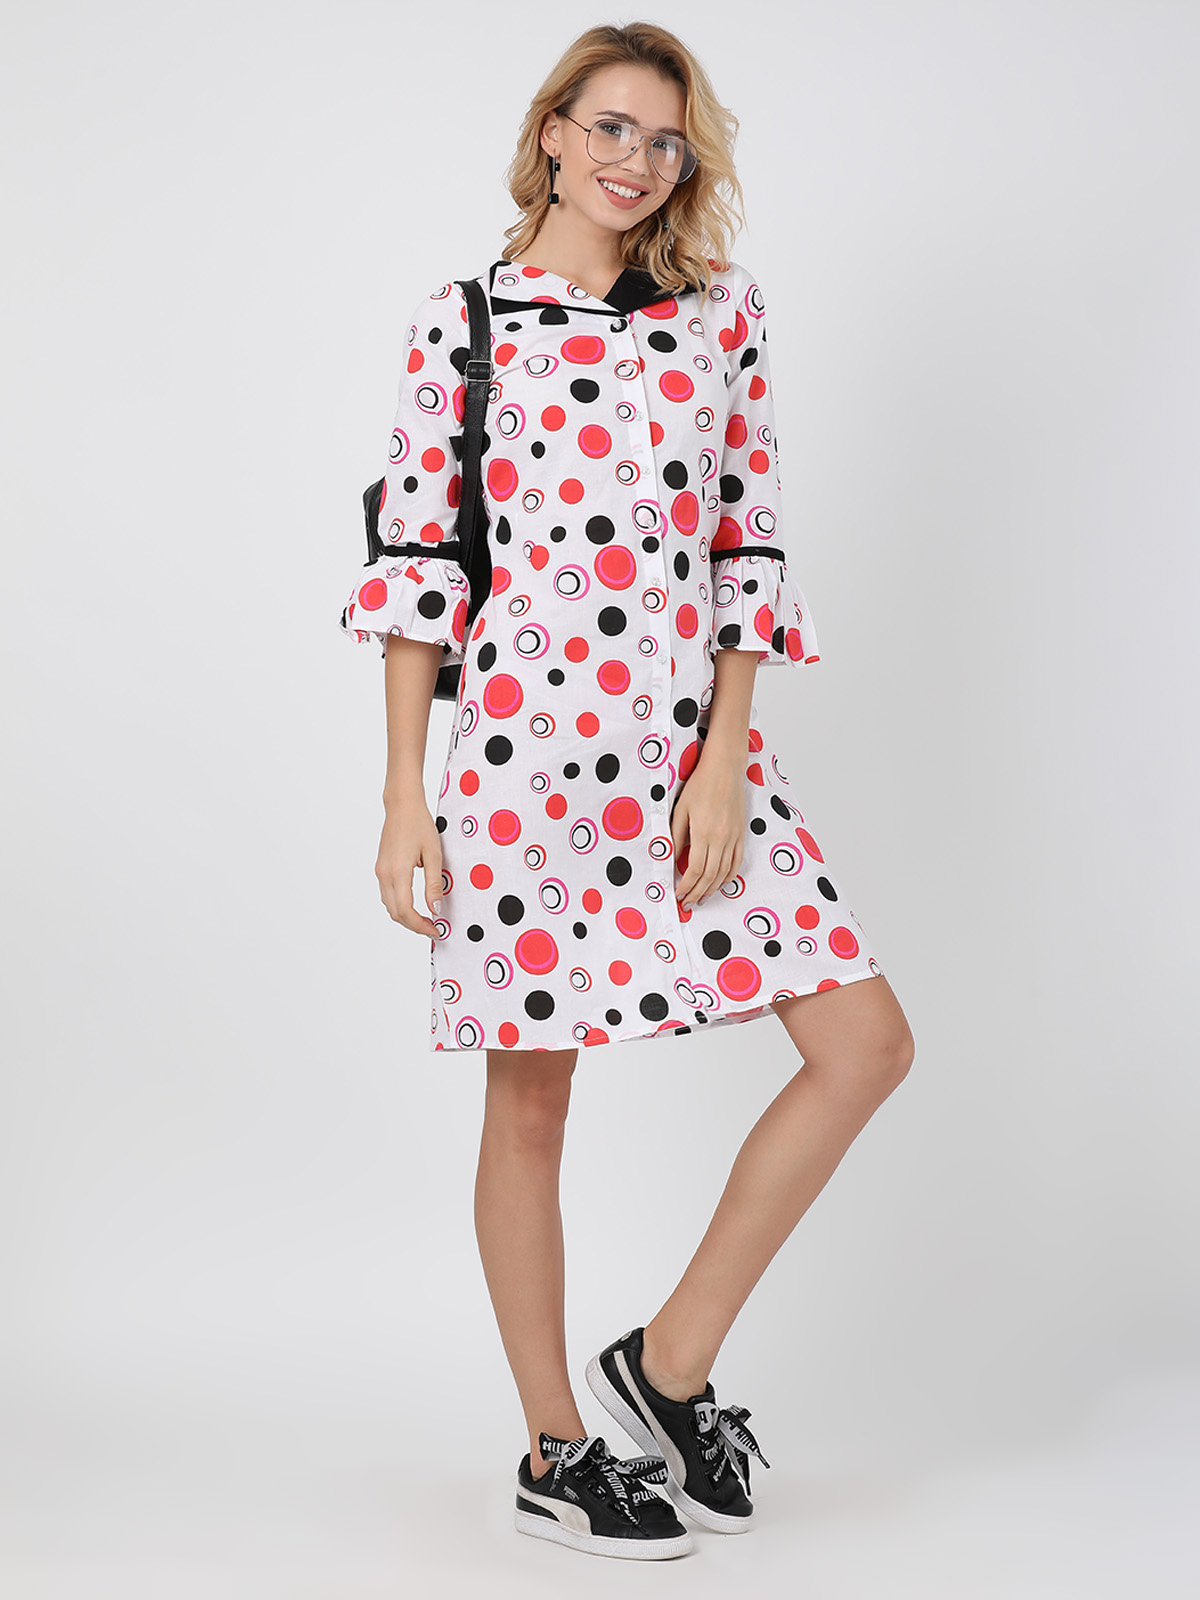  Exclusive Cotton Vintage Styled Red & Black Polka Dots A-Line Fit & Flair Dress